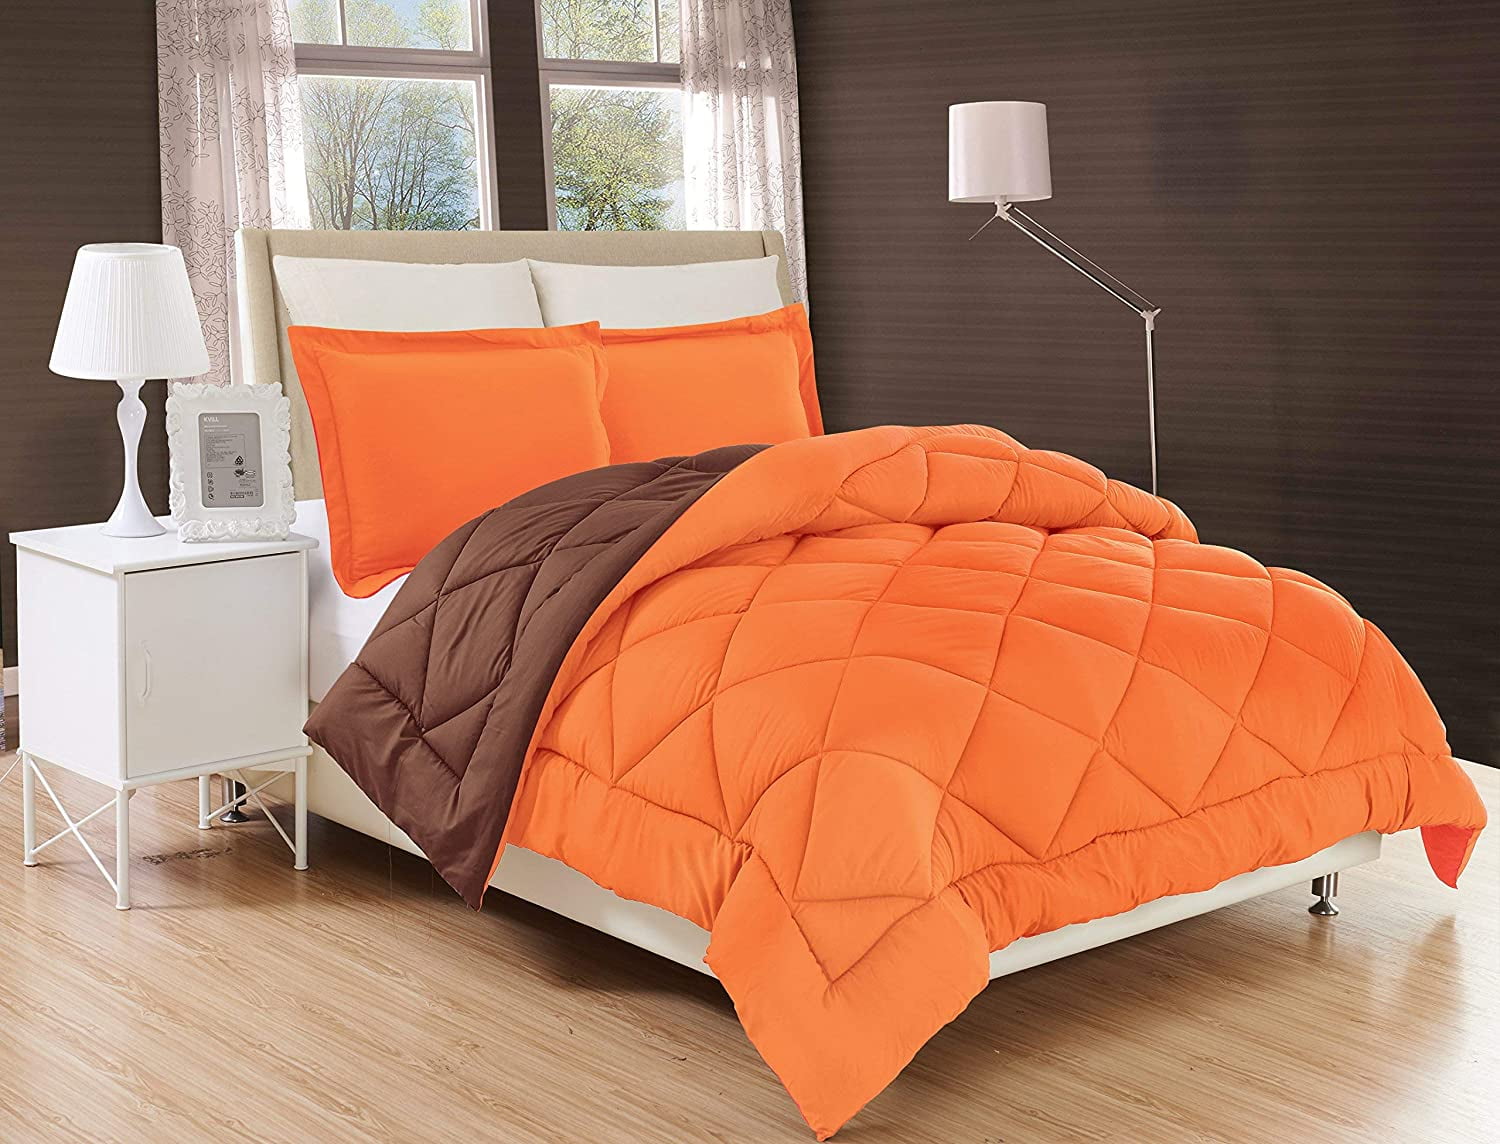 Reversible 3pc Comforter Set- Available In A Few Sizes And Colors ,  Full/Queen, Orange/Chocolate